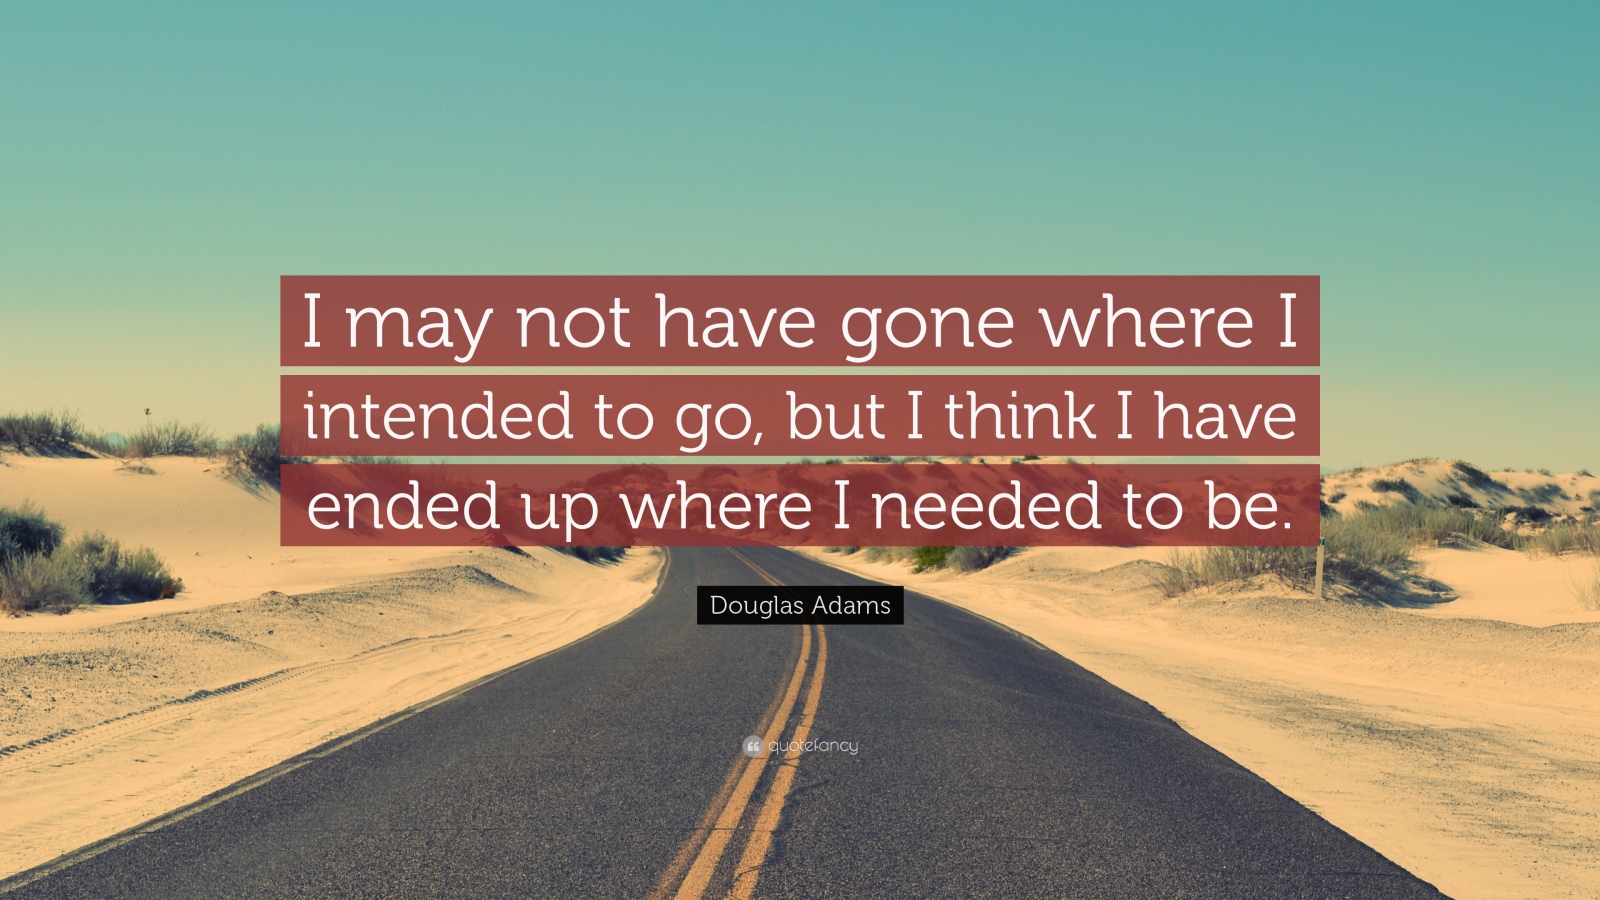 I may not have gone where I intended to go, but I think I have ended up where I needed to be (2)